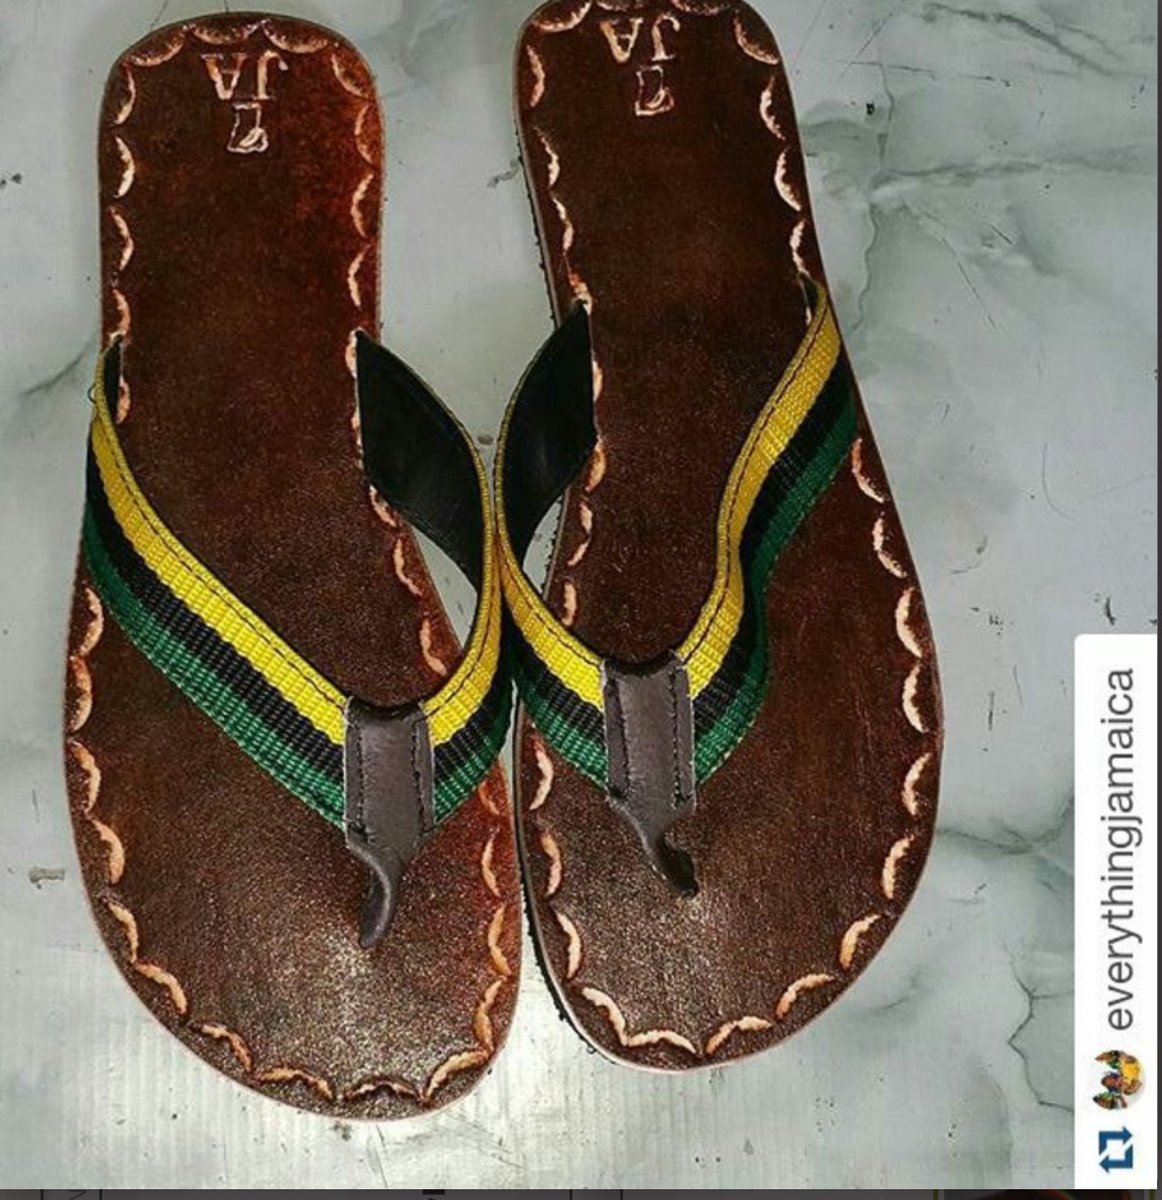 Jamaica color leather sandals | Everything Jamaica